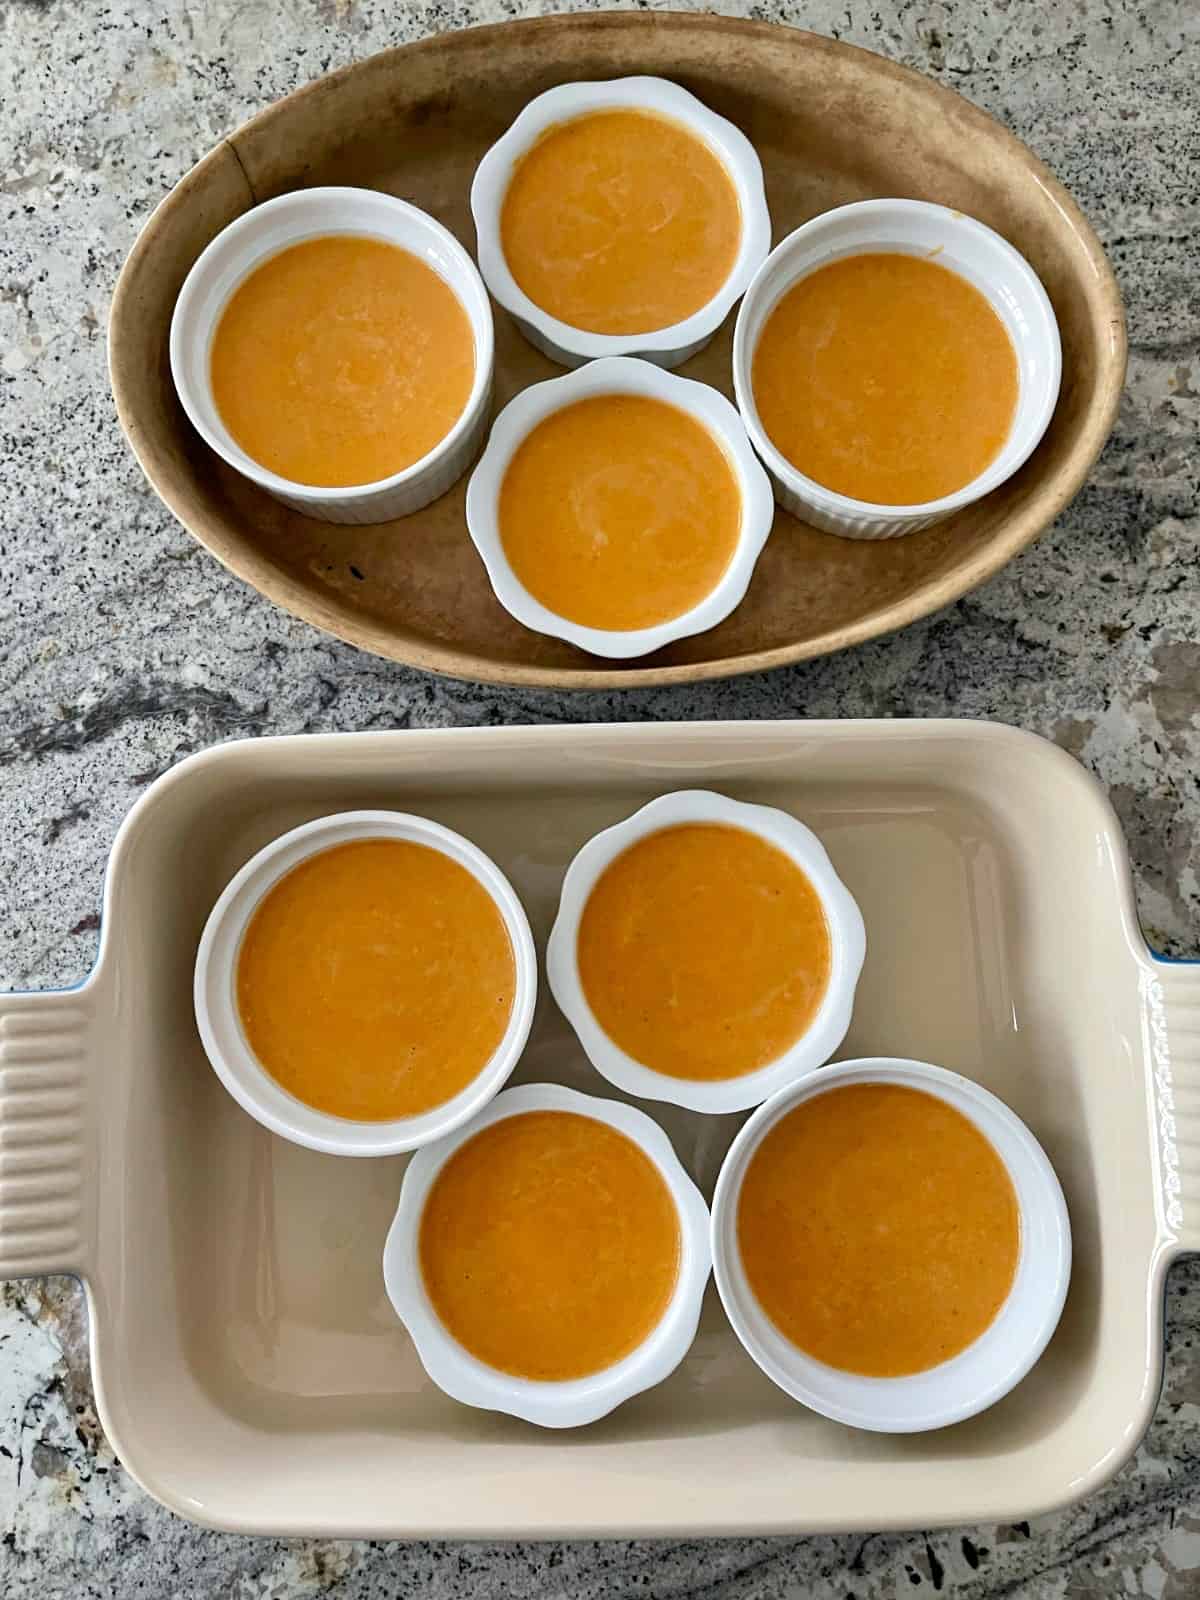 Eight ramekins with unbaked pumpkin pie custard in two large baking dishes.